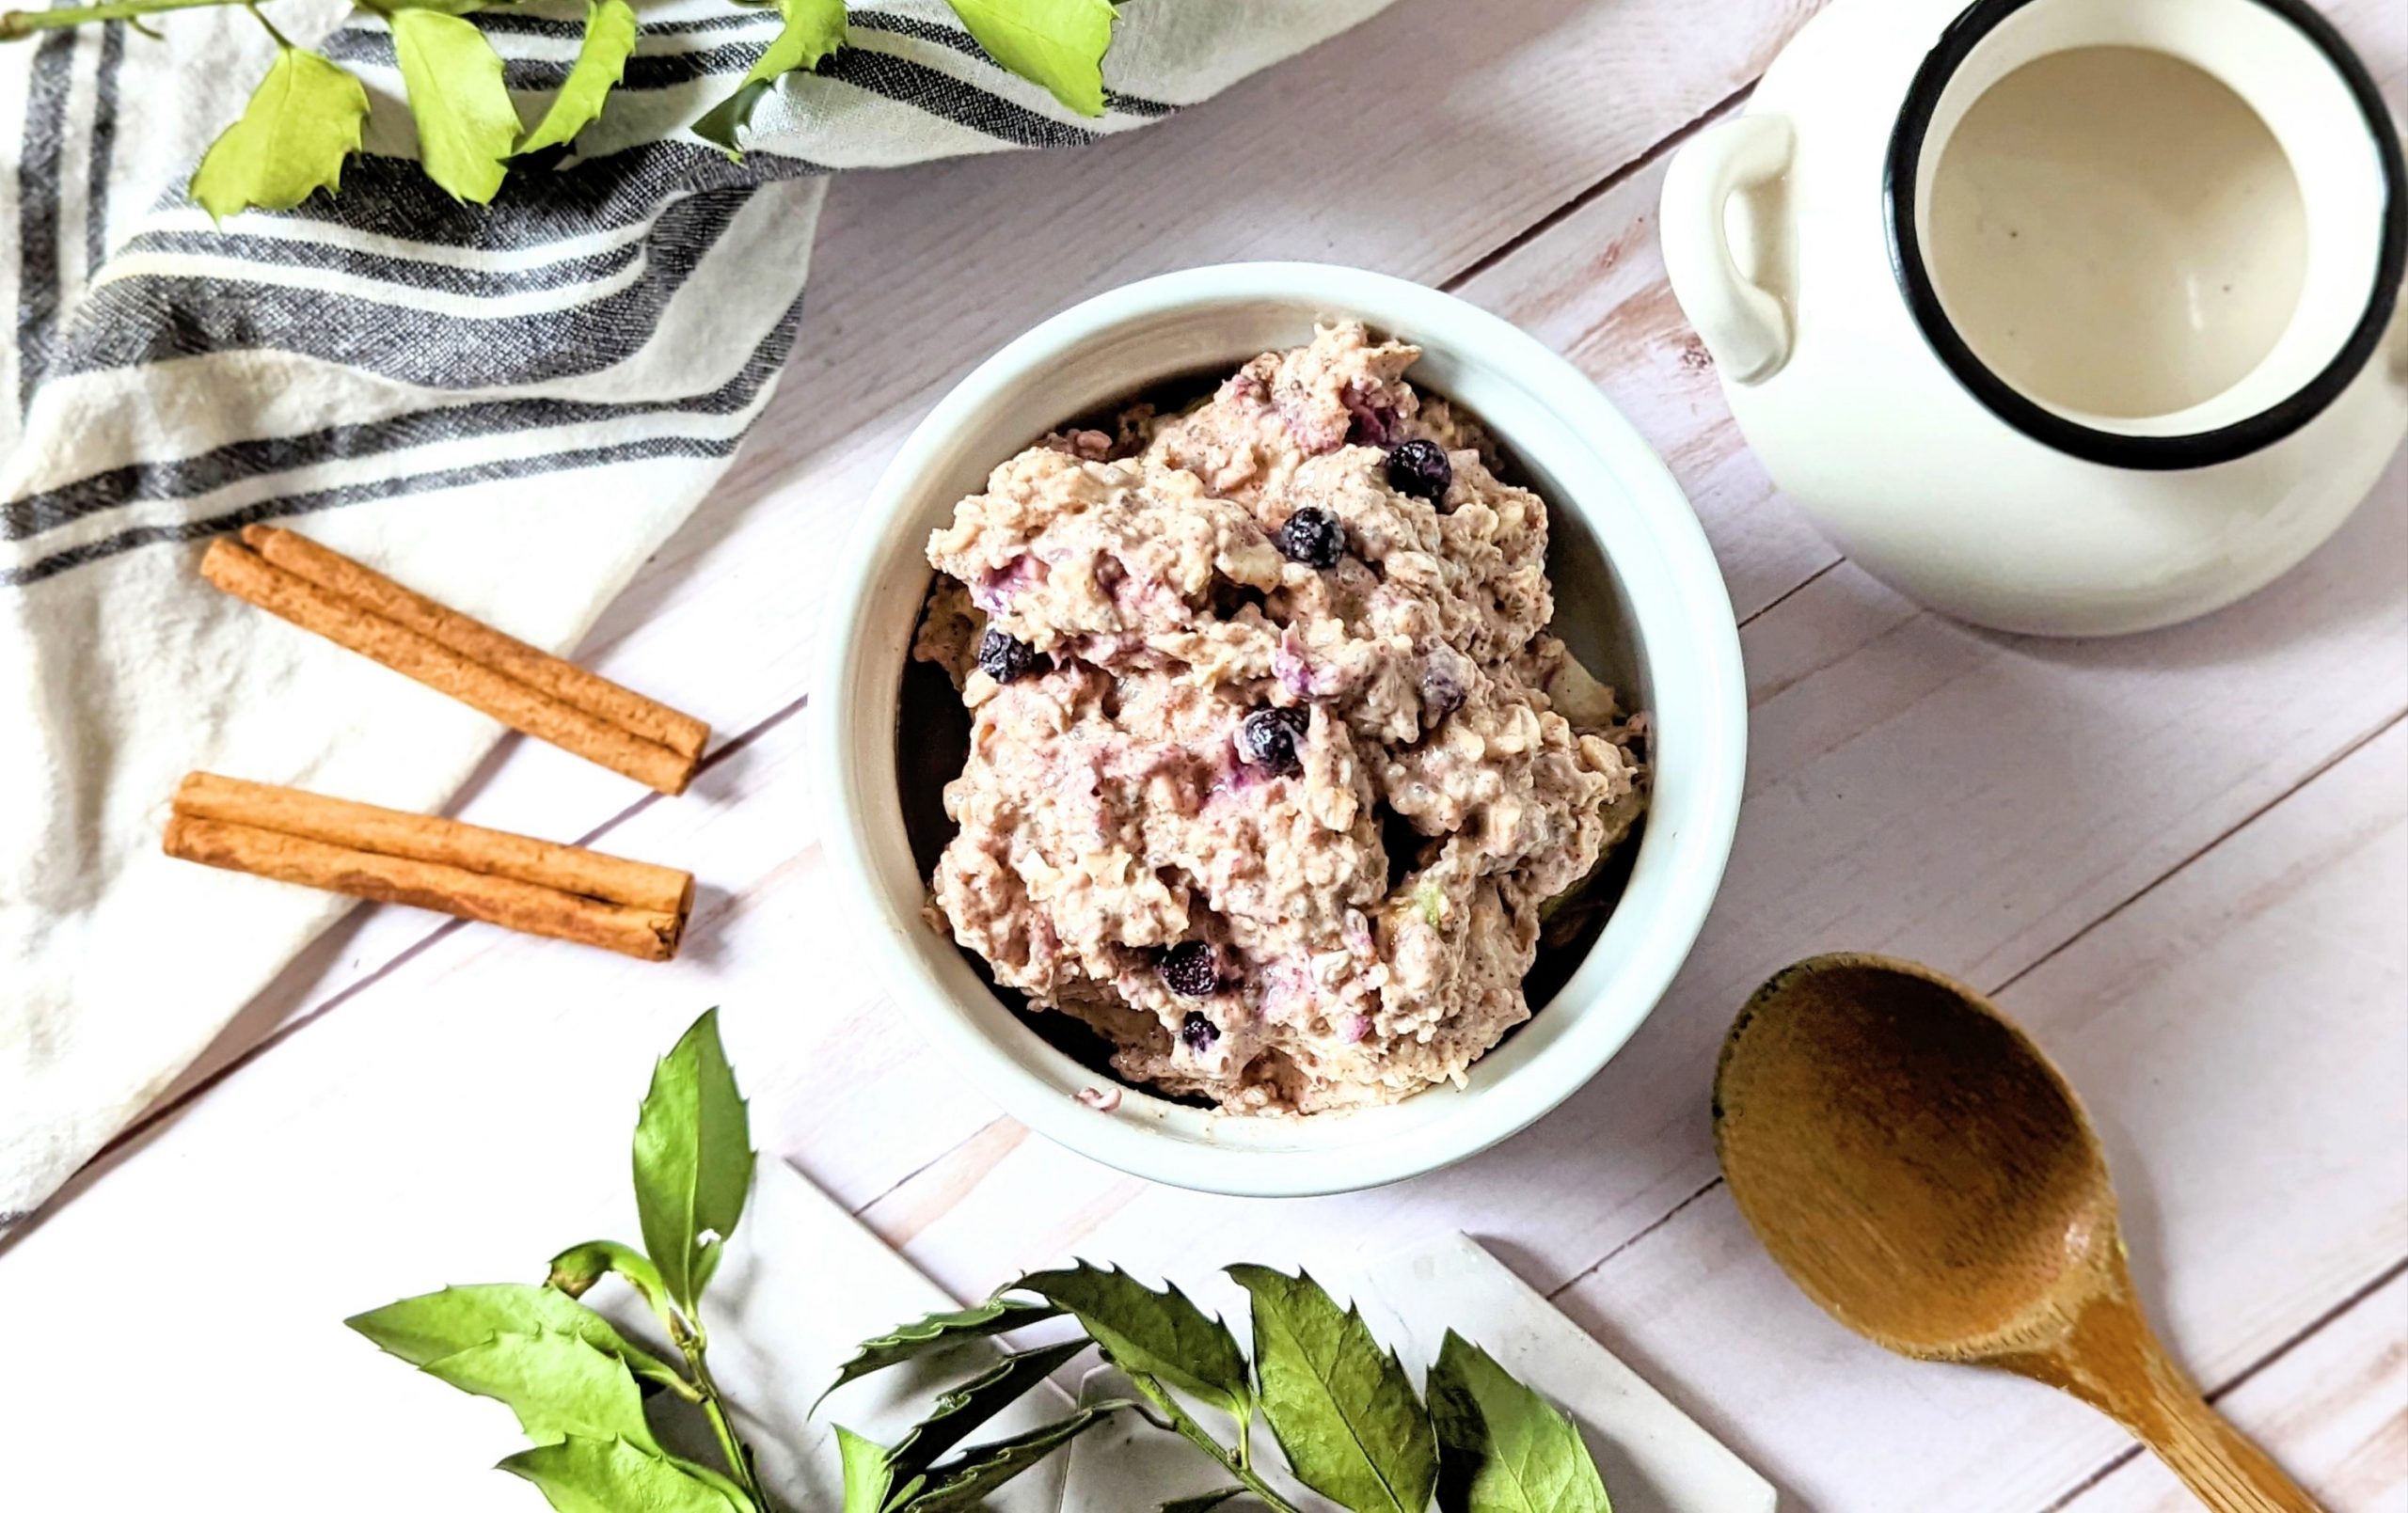 high protein blueberry overnight oats recipe gluten free no cook breakfast ideas on the go brunch recipes for breakfast healthy recipes with nonfat greek yogurt or full fat